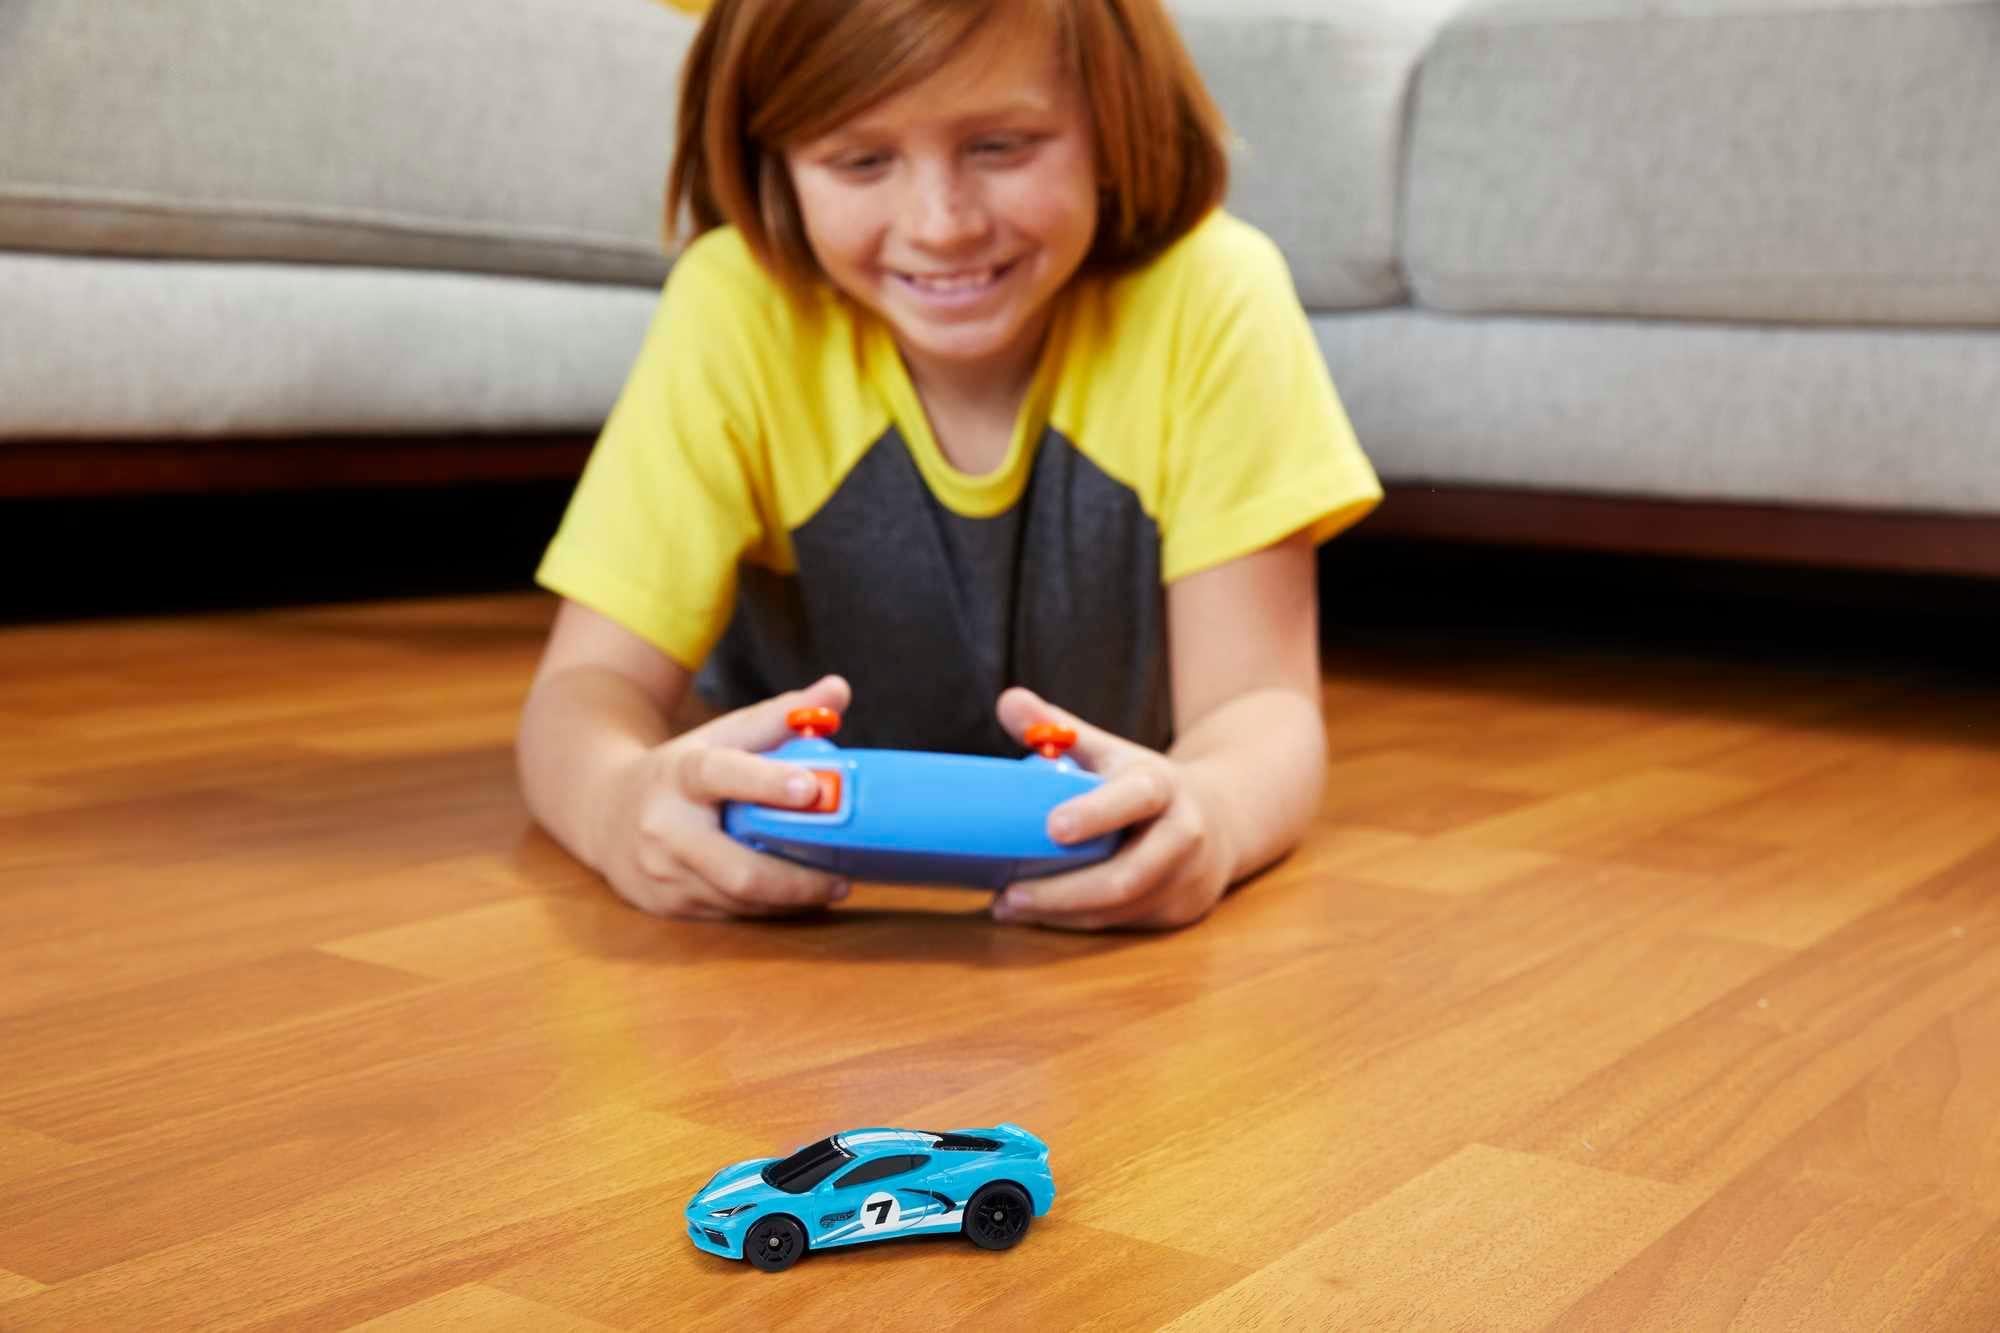 Hot Wheels Rc Corvette: Realistic design and durable construction make the Hot Wheels RC Corvette a must-have for collectors and kids